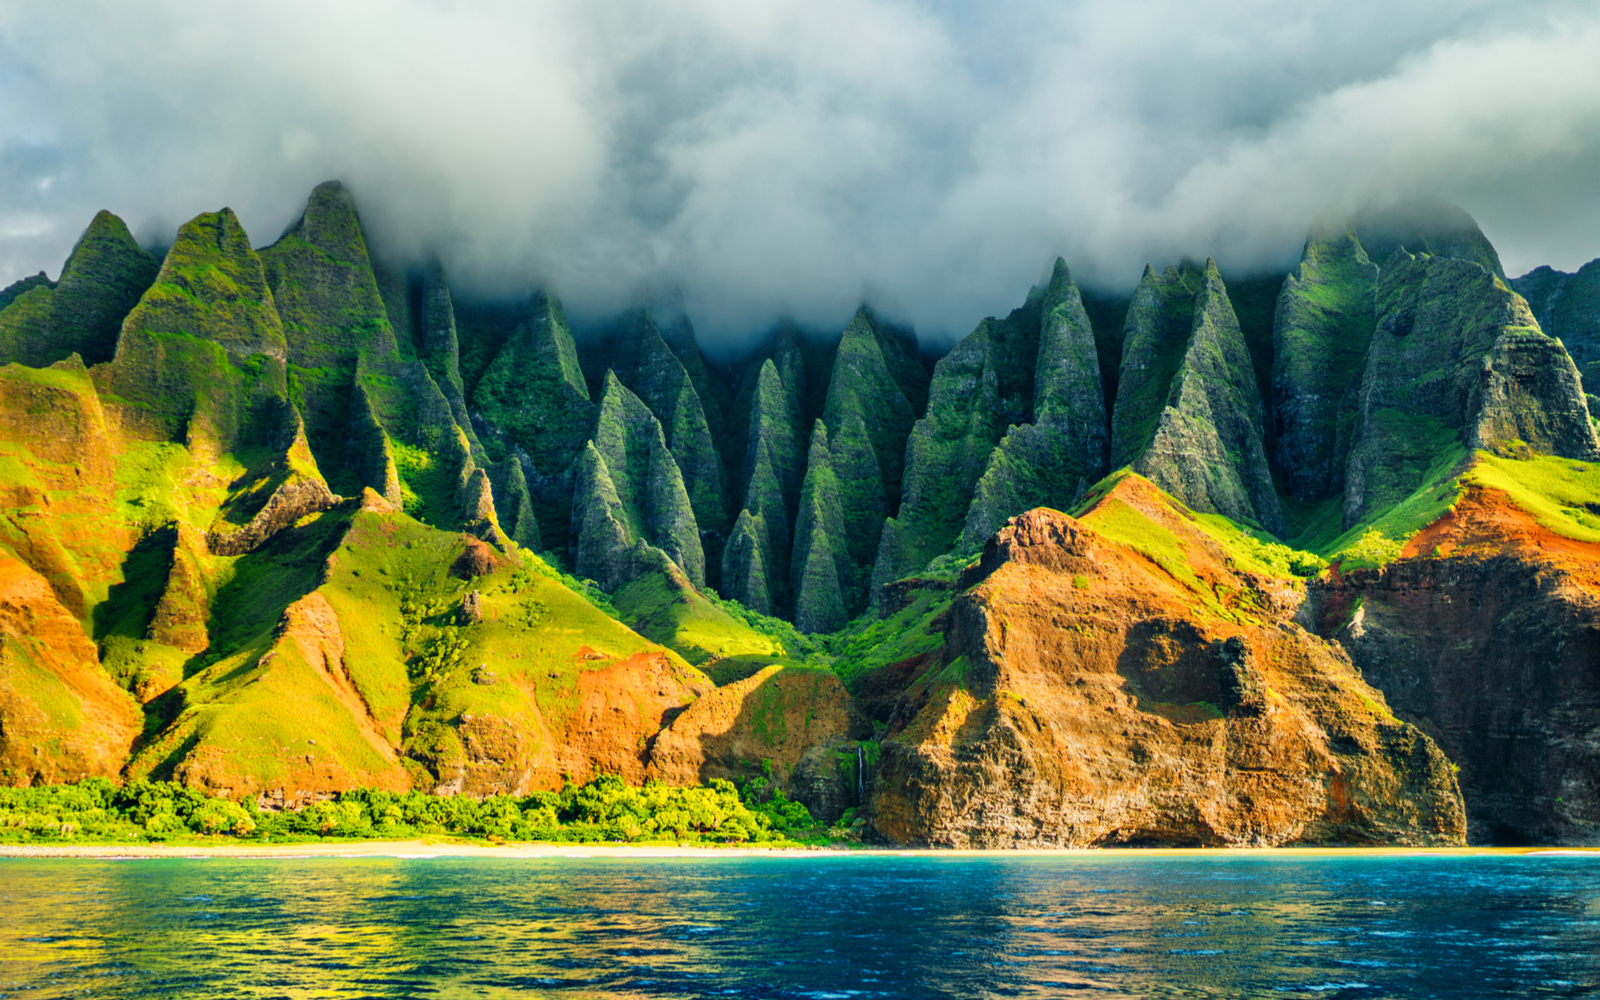 The Best Time to Visit Kauai in 2022